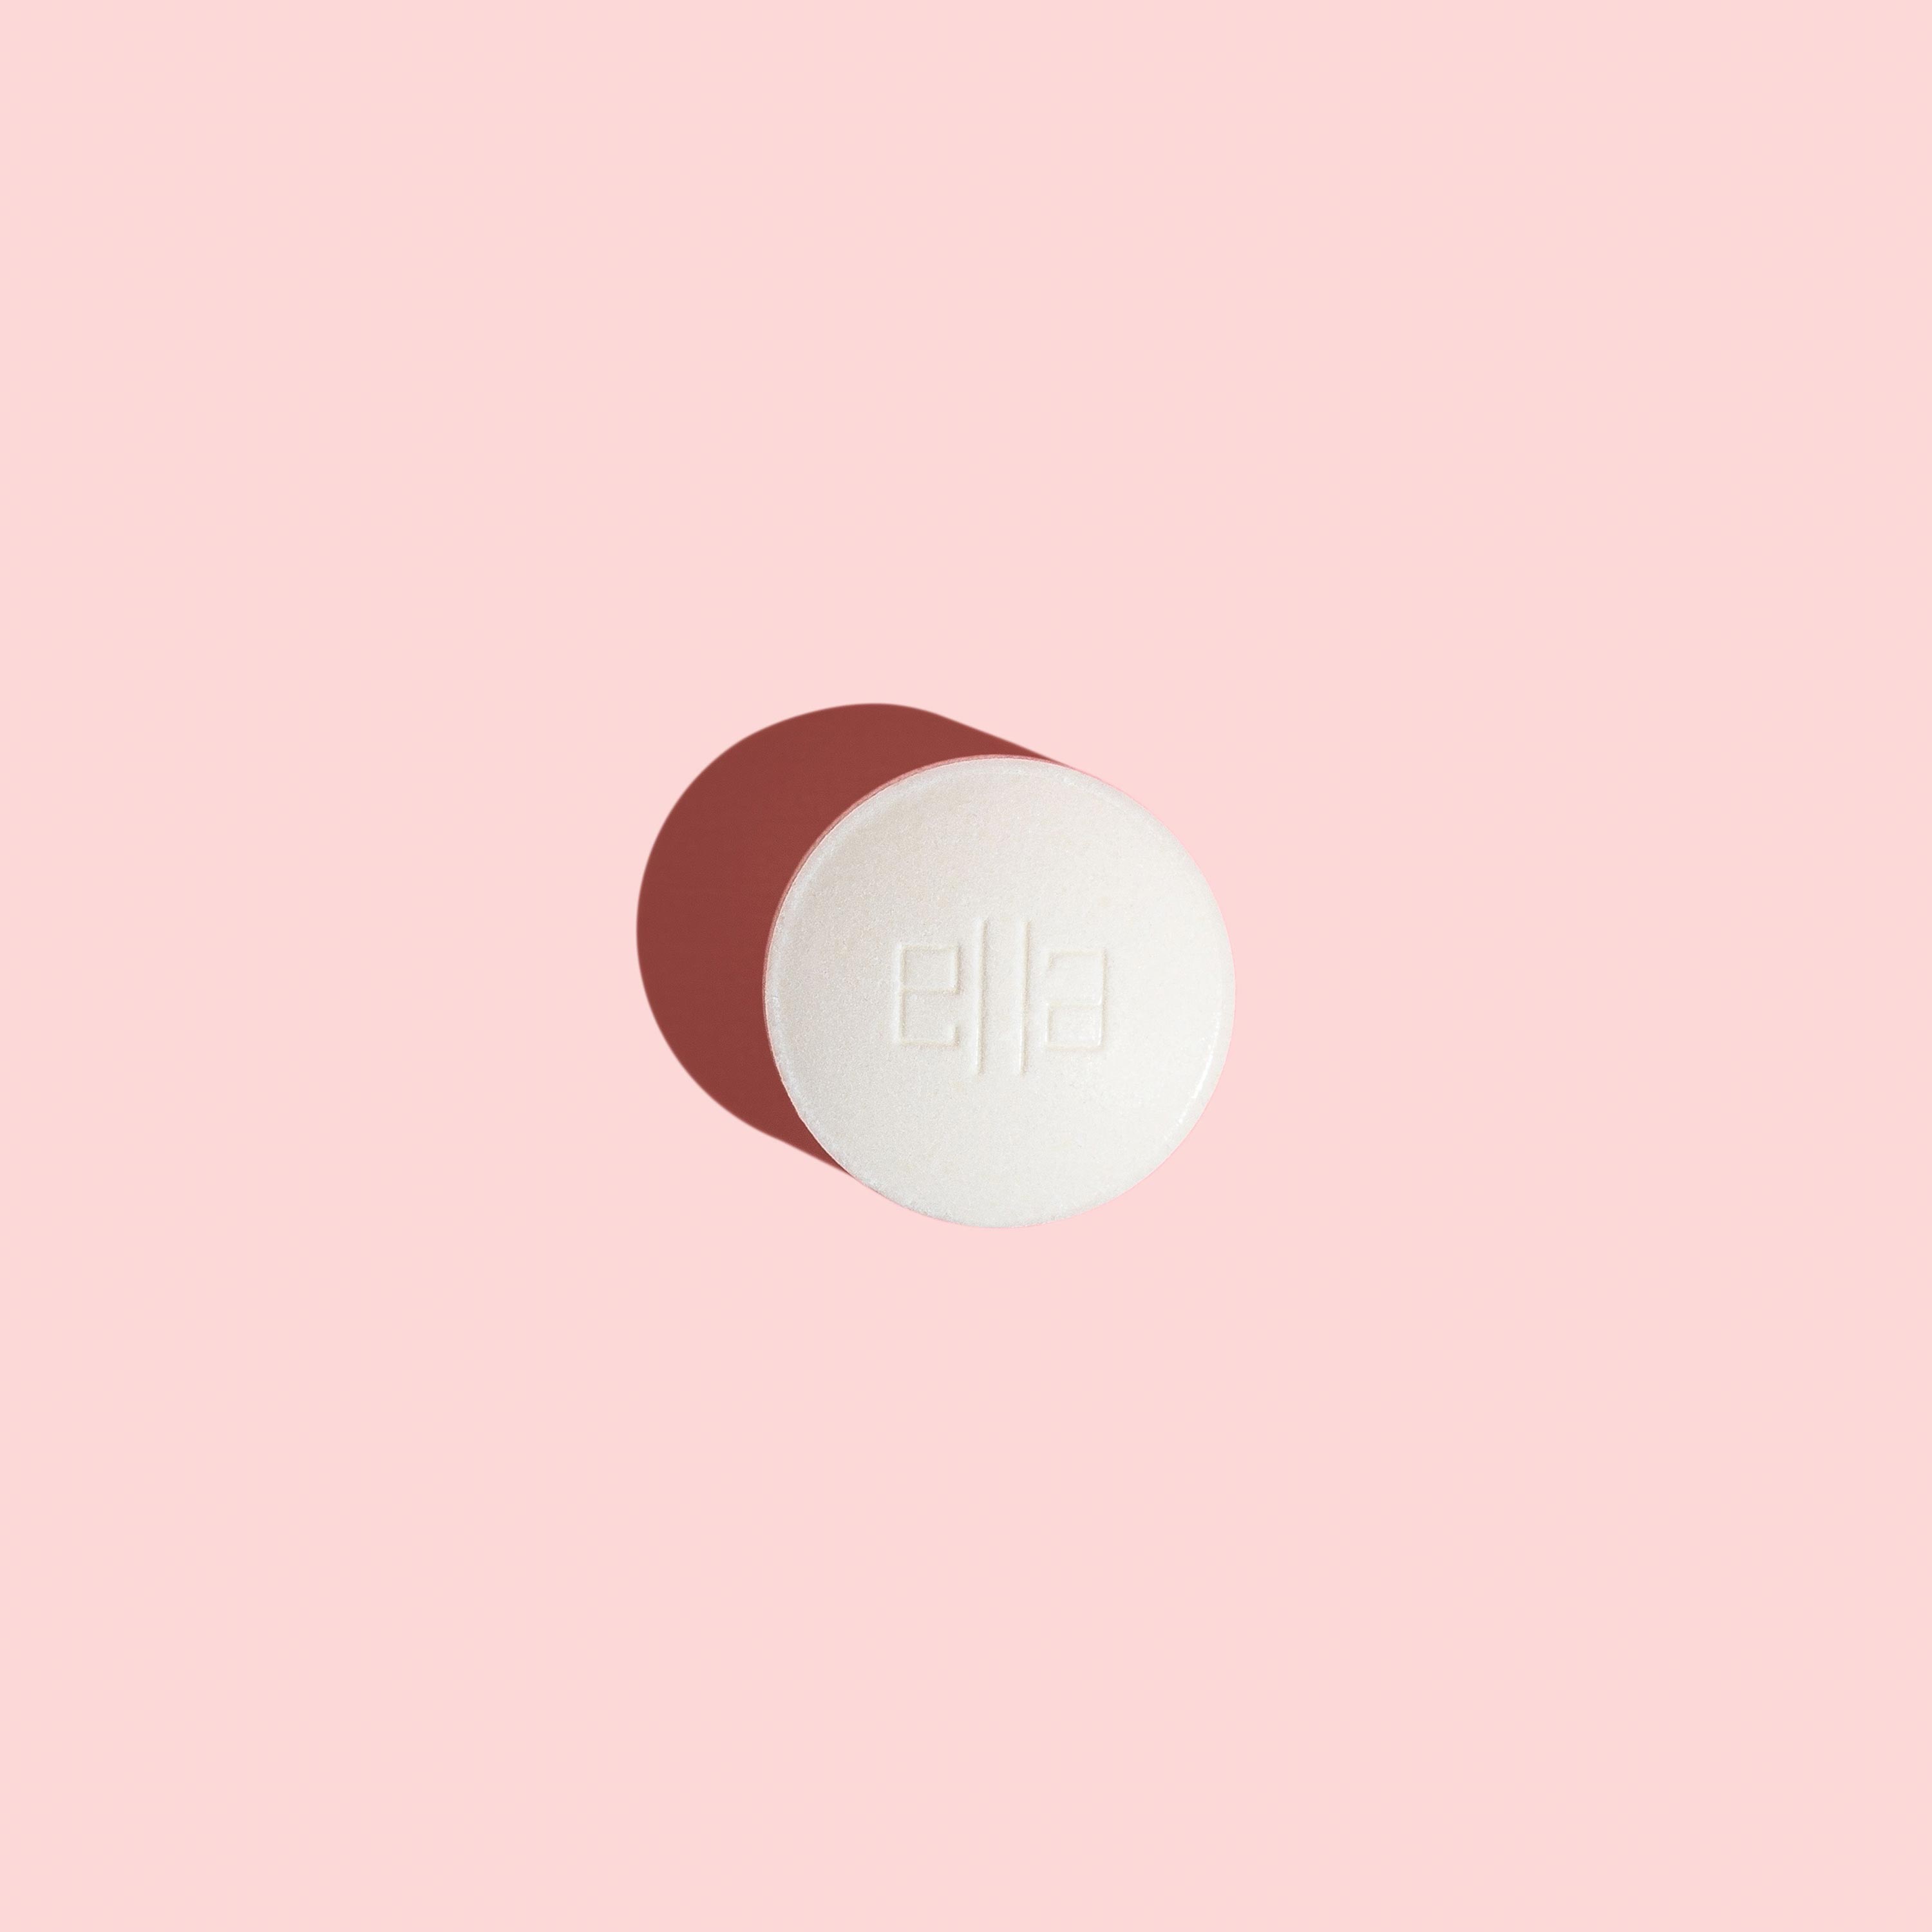 Ella emergency contraception pill to prevent pregnancy on a pink background